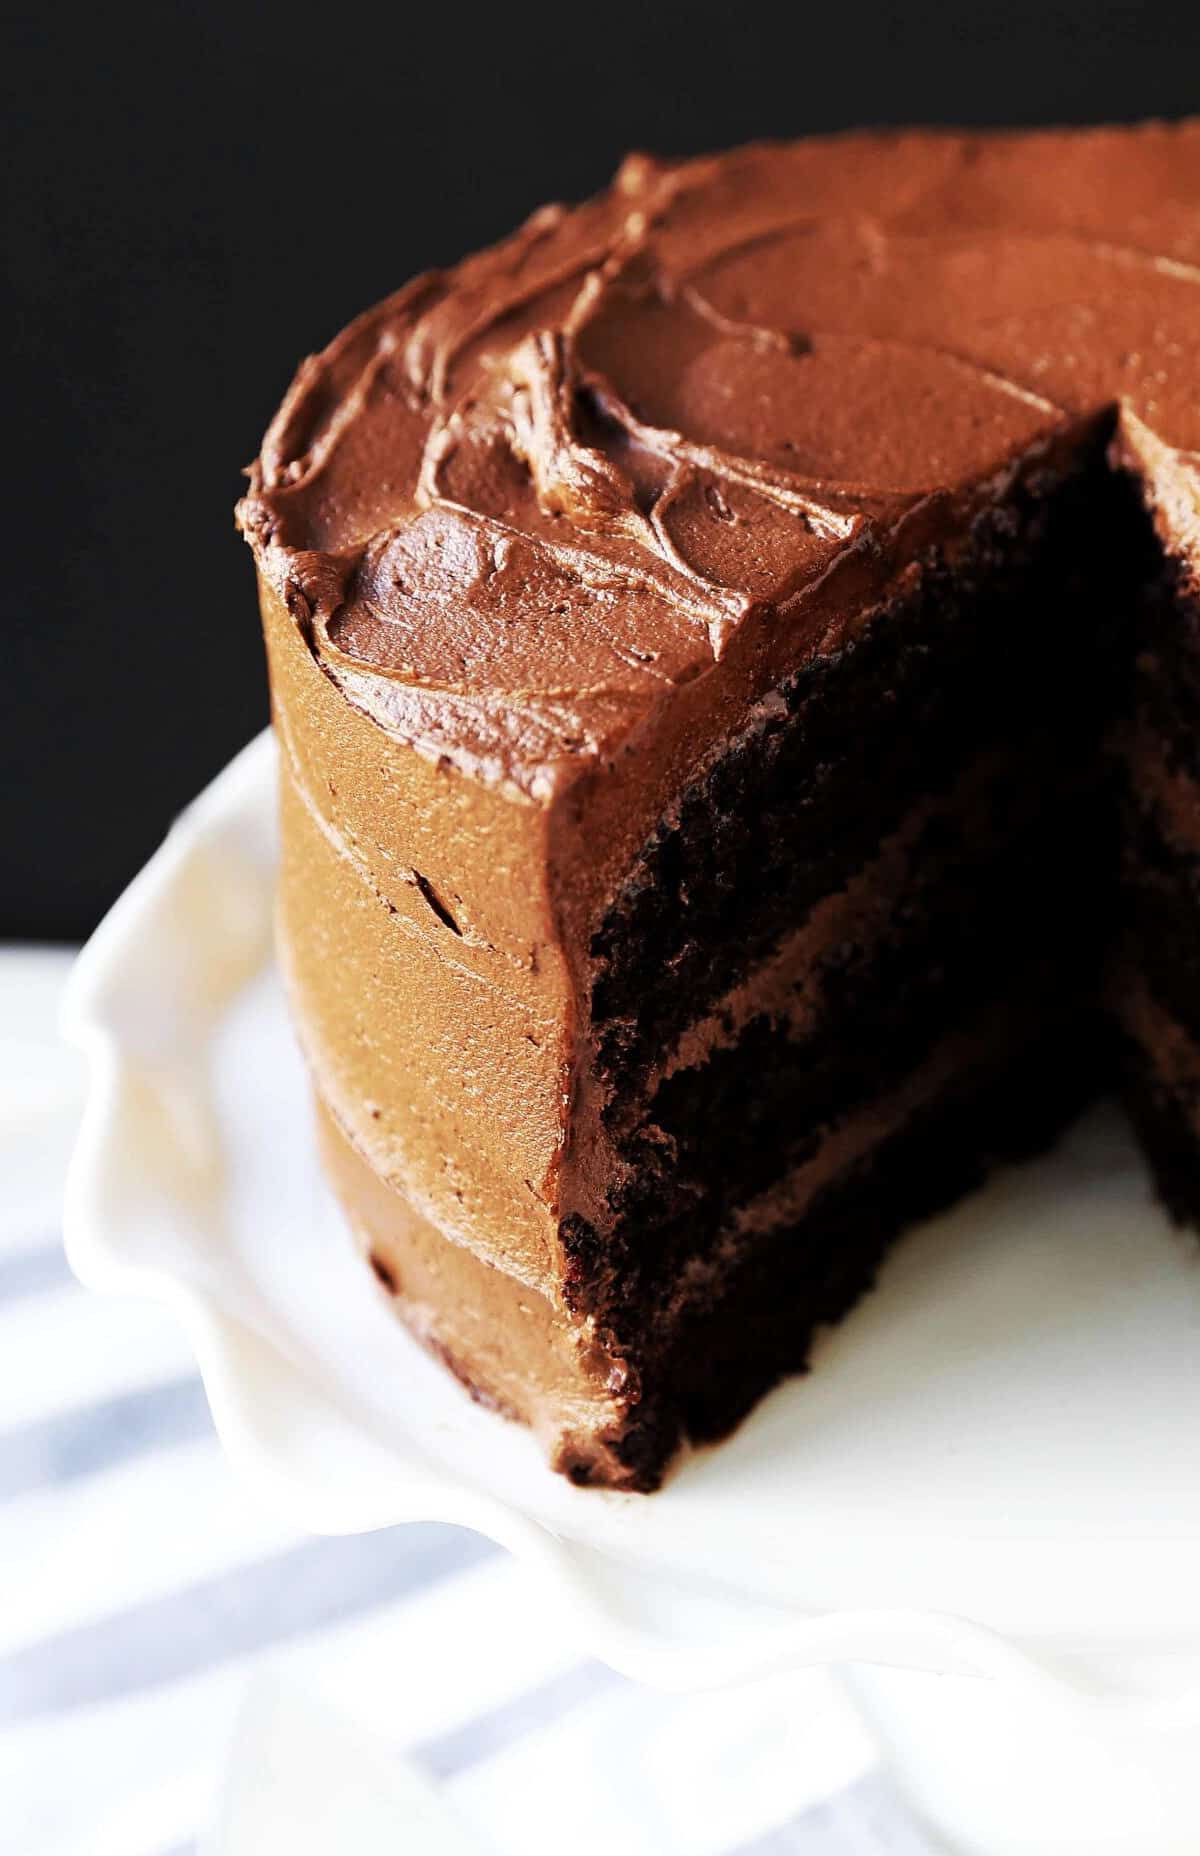  For the serious chocoholics out there, this cake is a must-try.